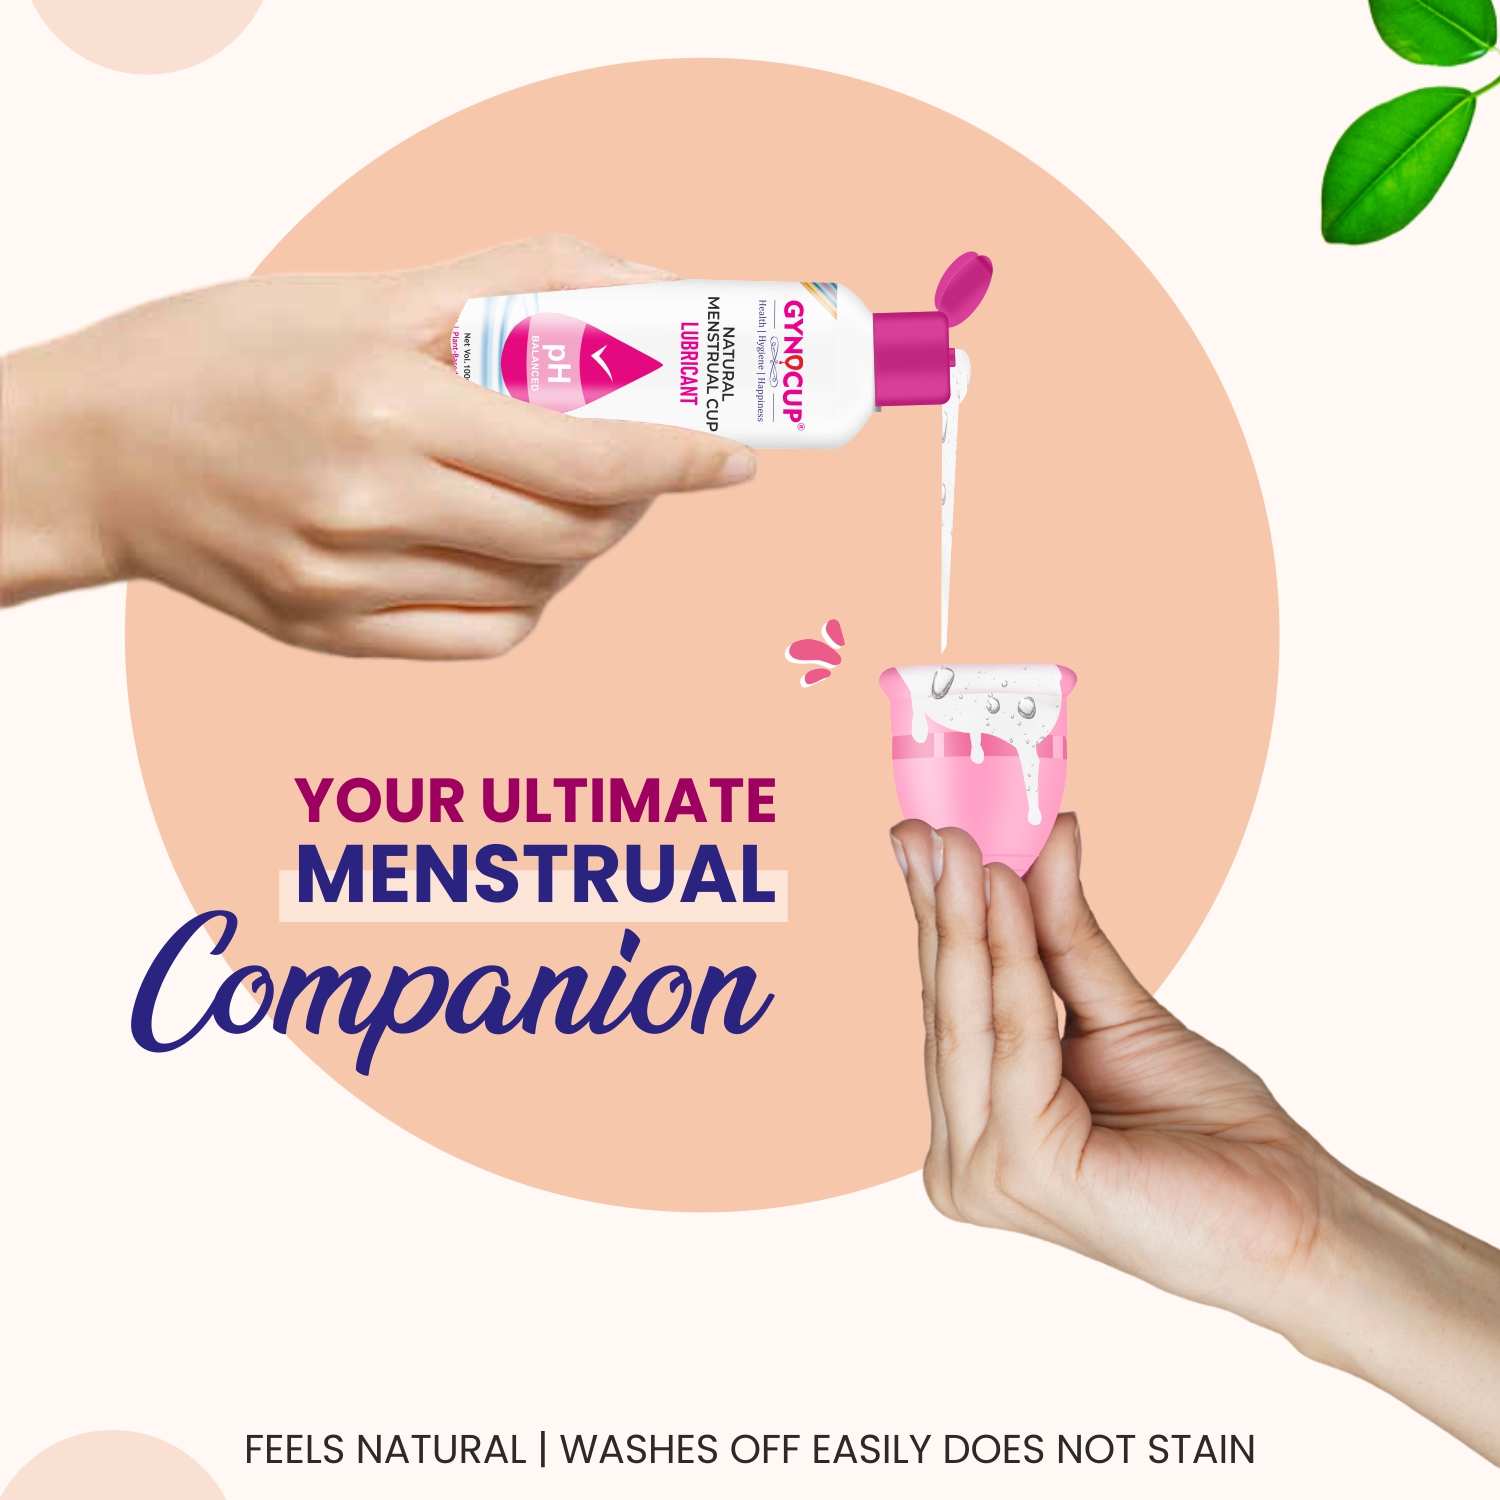 GynoCup Menstrual Cup Lubricant Water Based & PH Balanced, Helps To Wear Menstrual Cup (100 Ml)